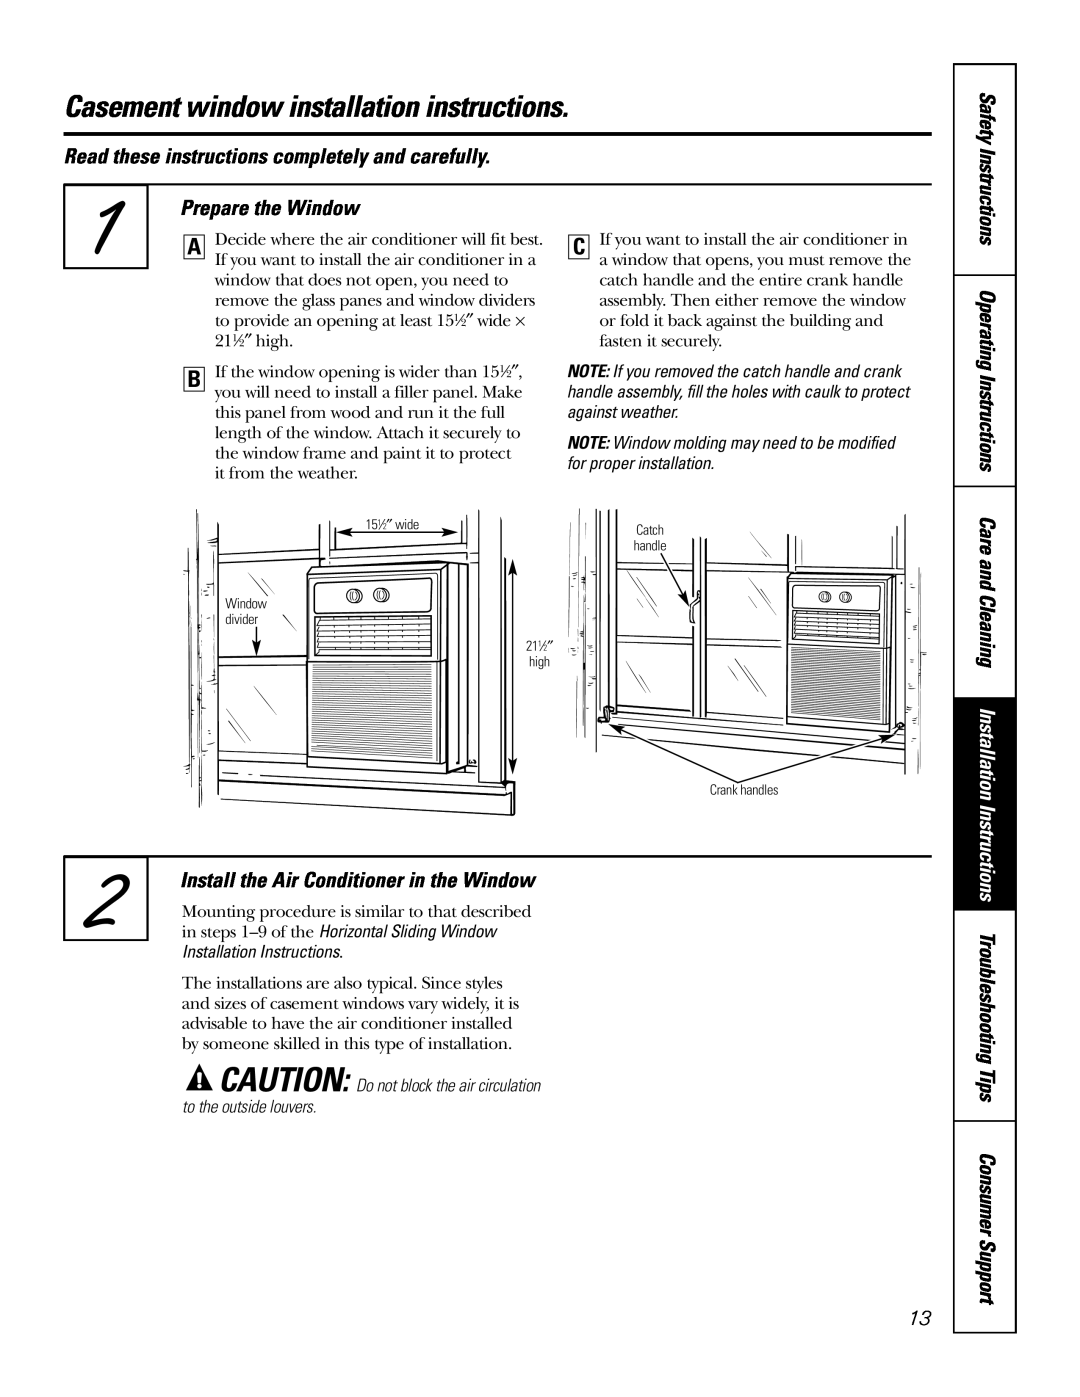 GE AGX10, AGX08 Casement window installation instructions, Prepare the Window, Care and Cleaning Installation, Safety 